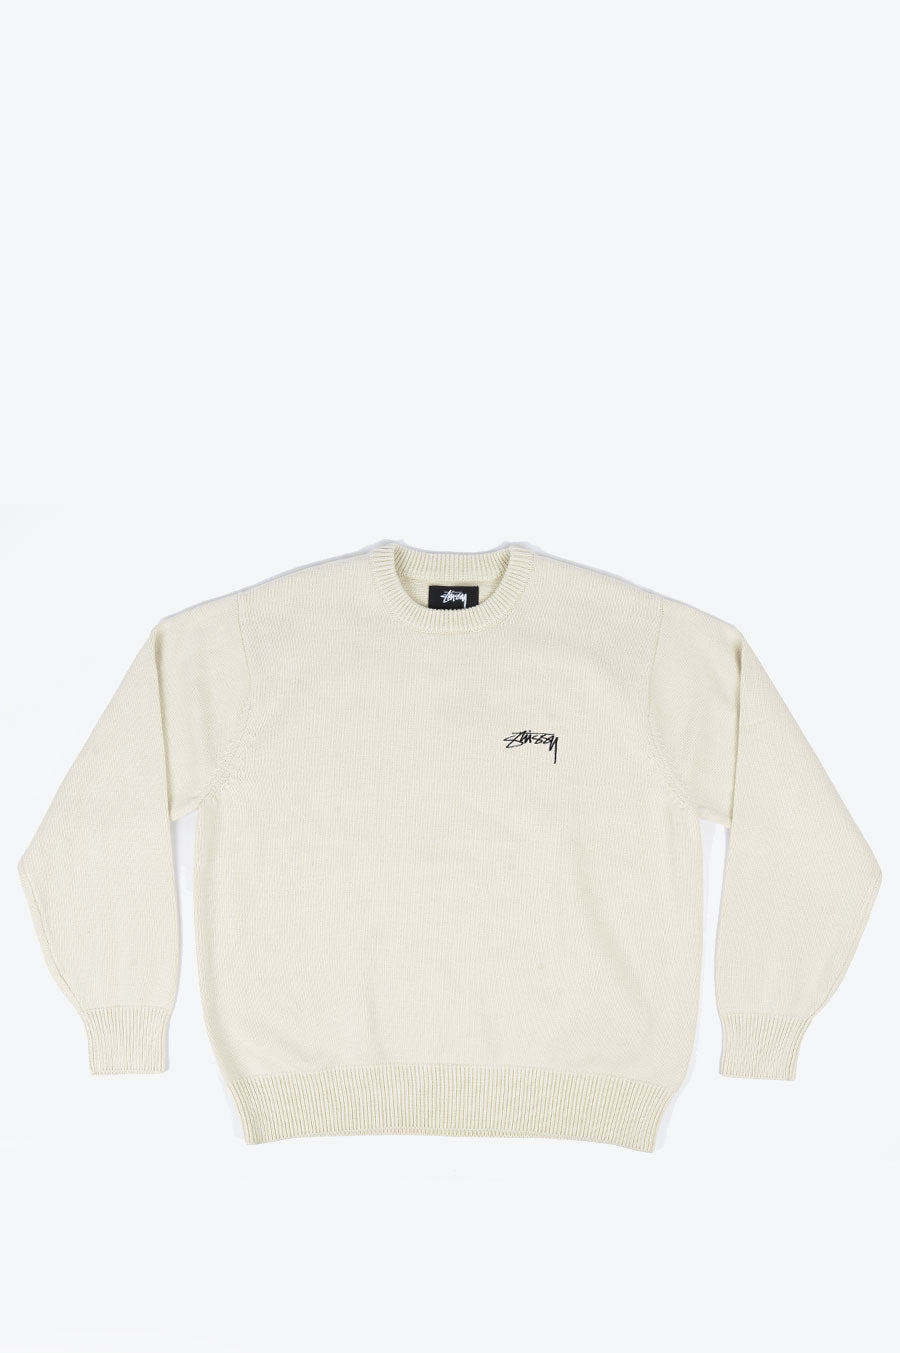 STUSSY CARE LABEL SWEATER NATURAL | BLENDS